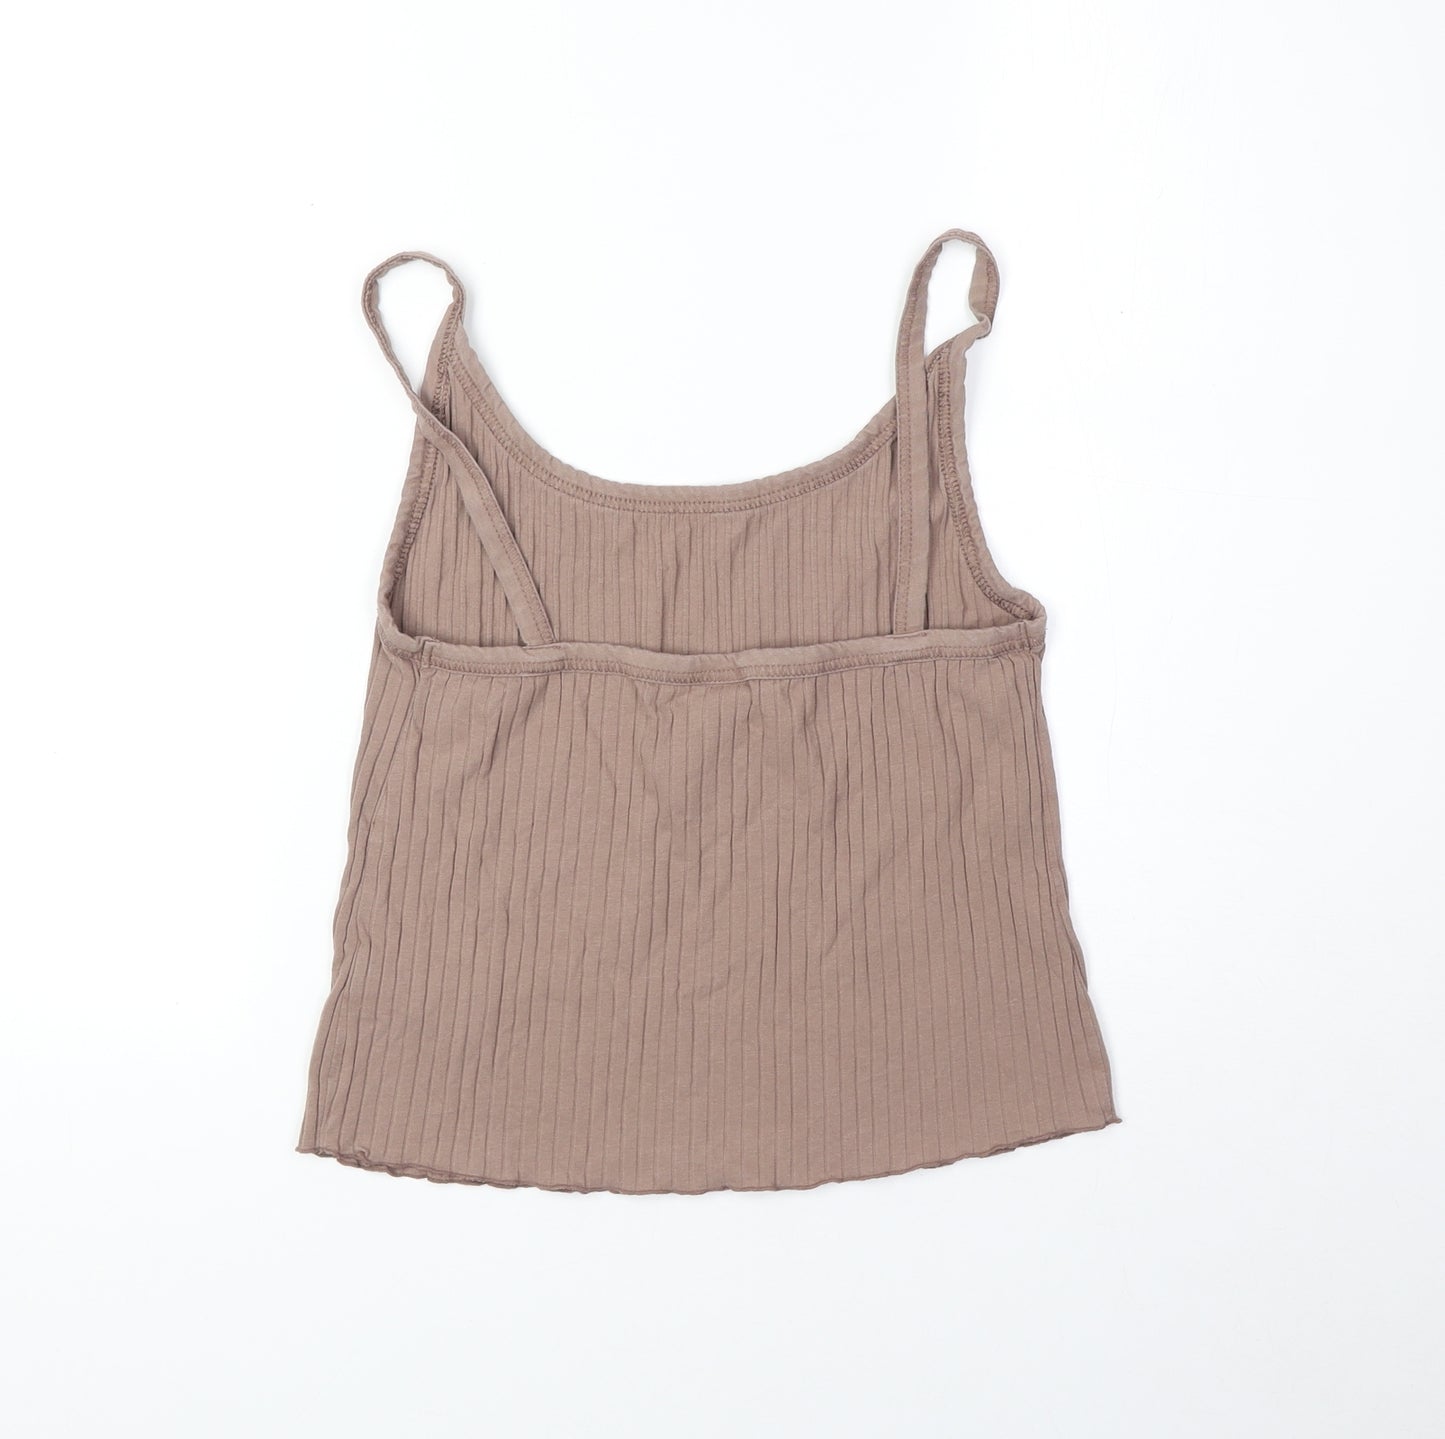 Old Navy Womens Brown Cotton Camisole Tank Size L Scoop Neck - Ribbed